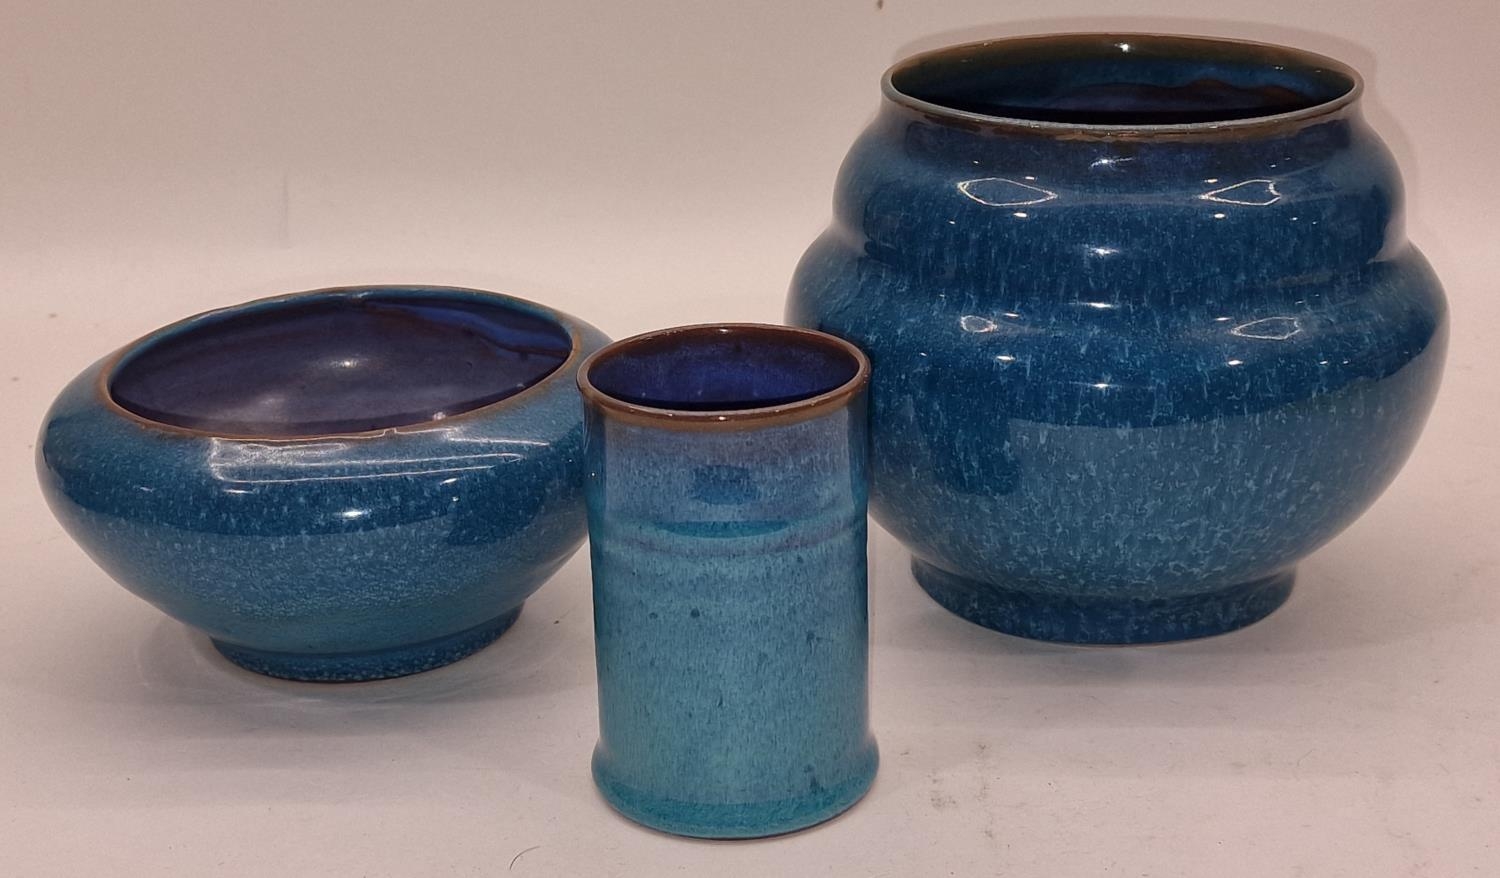 Poole Pottery Carter Stabler Adams Chinese Blue Glaze three pieces.